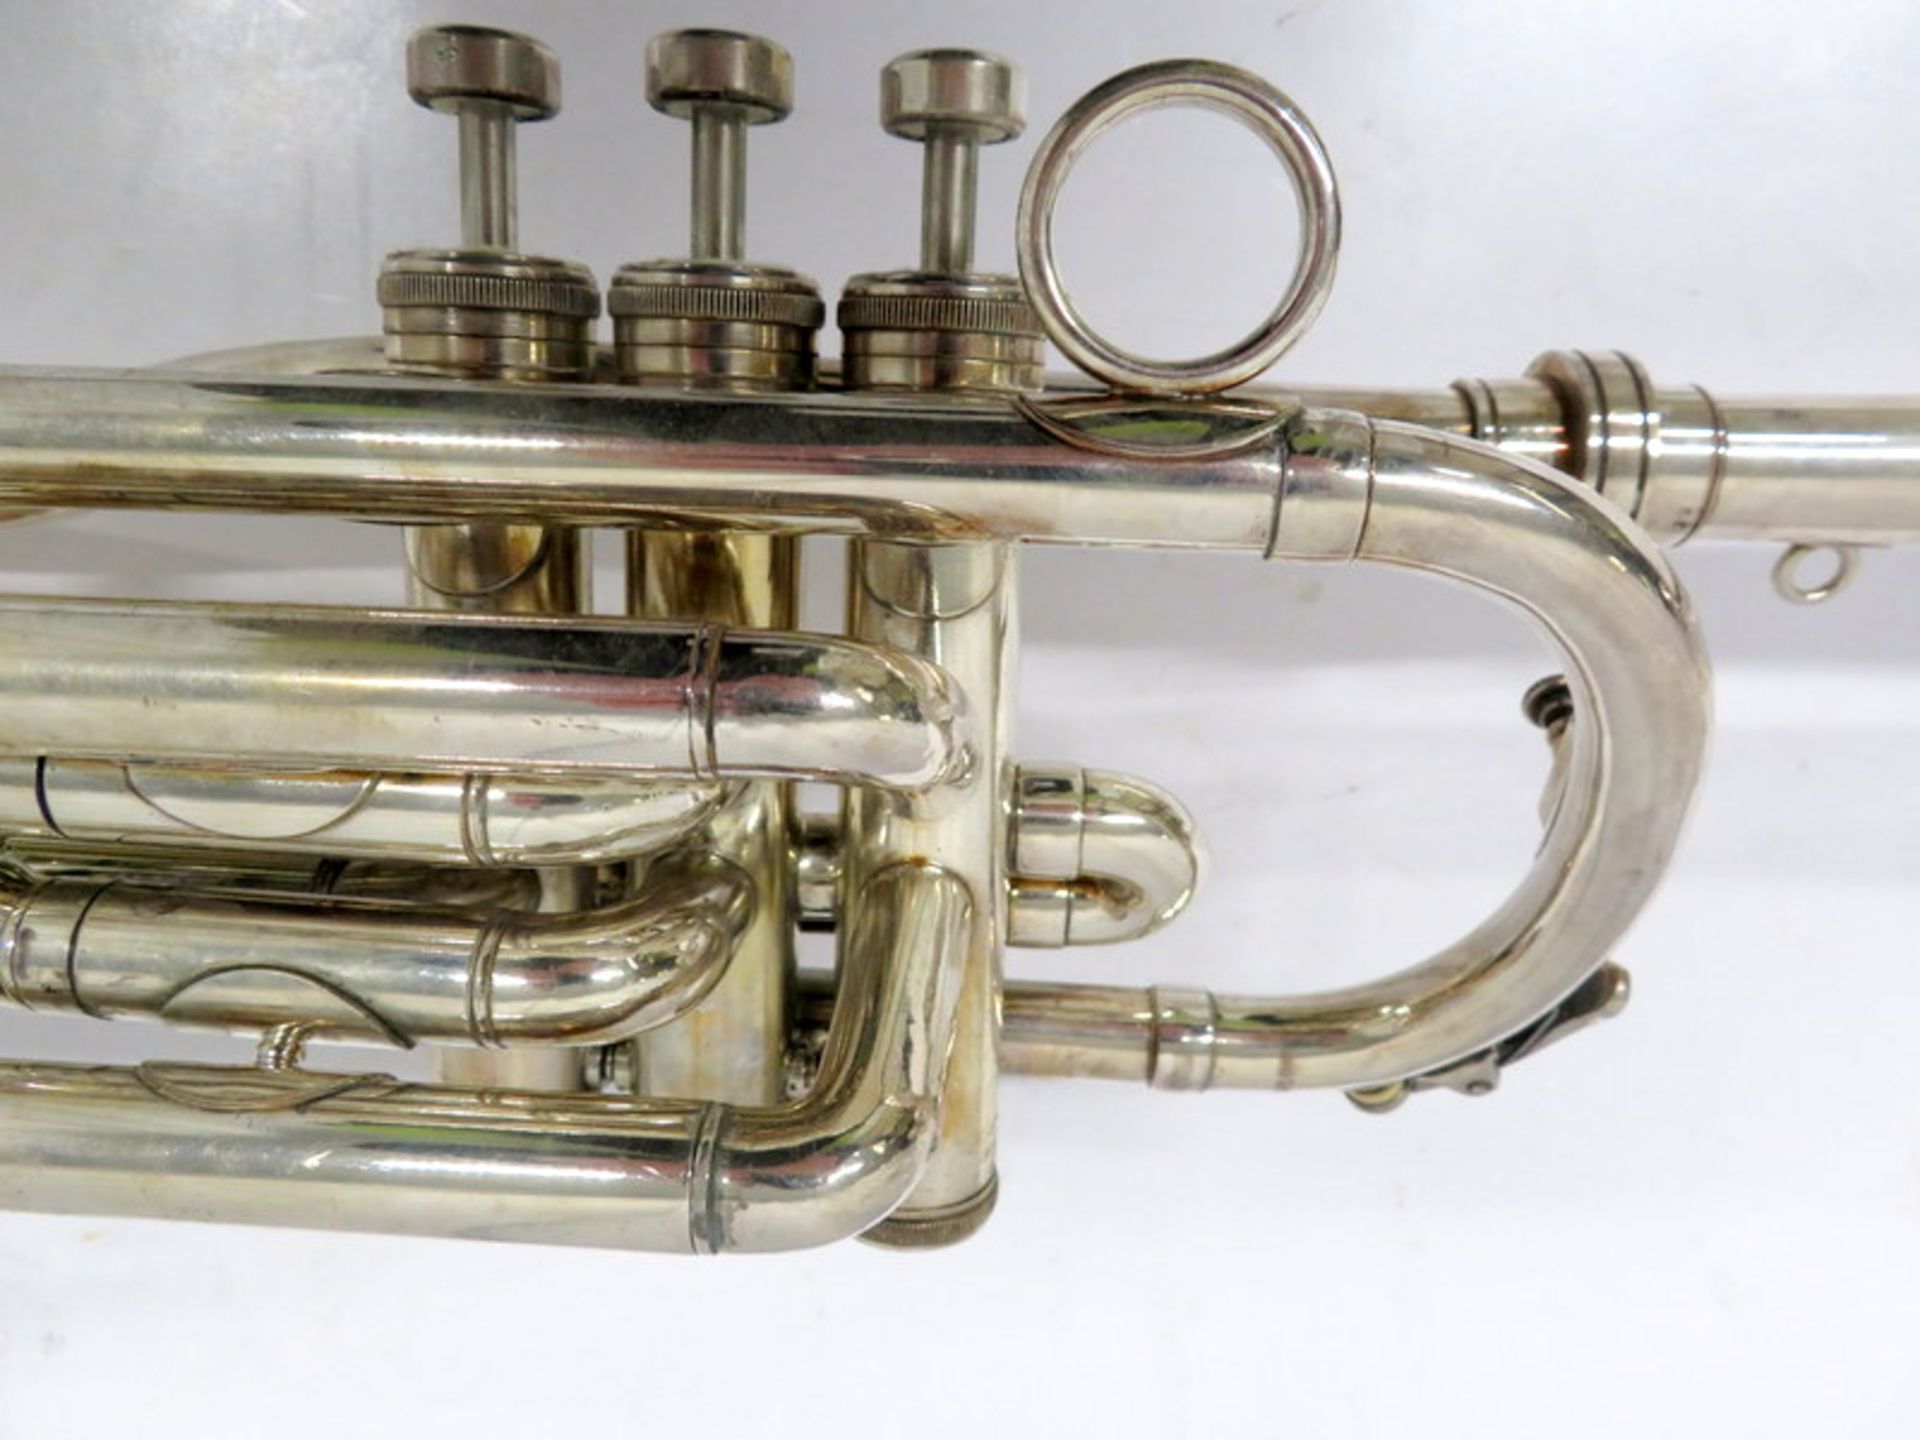 Boosey & Hawkes Imperial Fanfare Trumpet With Case. Serial Number: 591890. Please Note T - Image 12 of 14